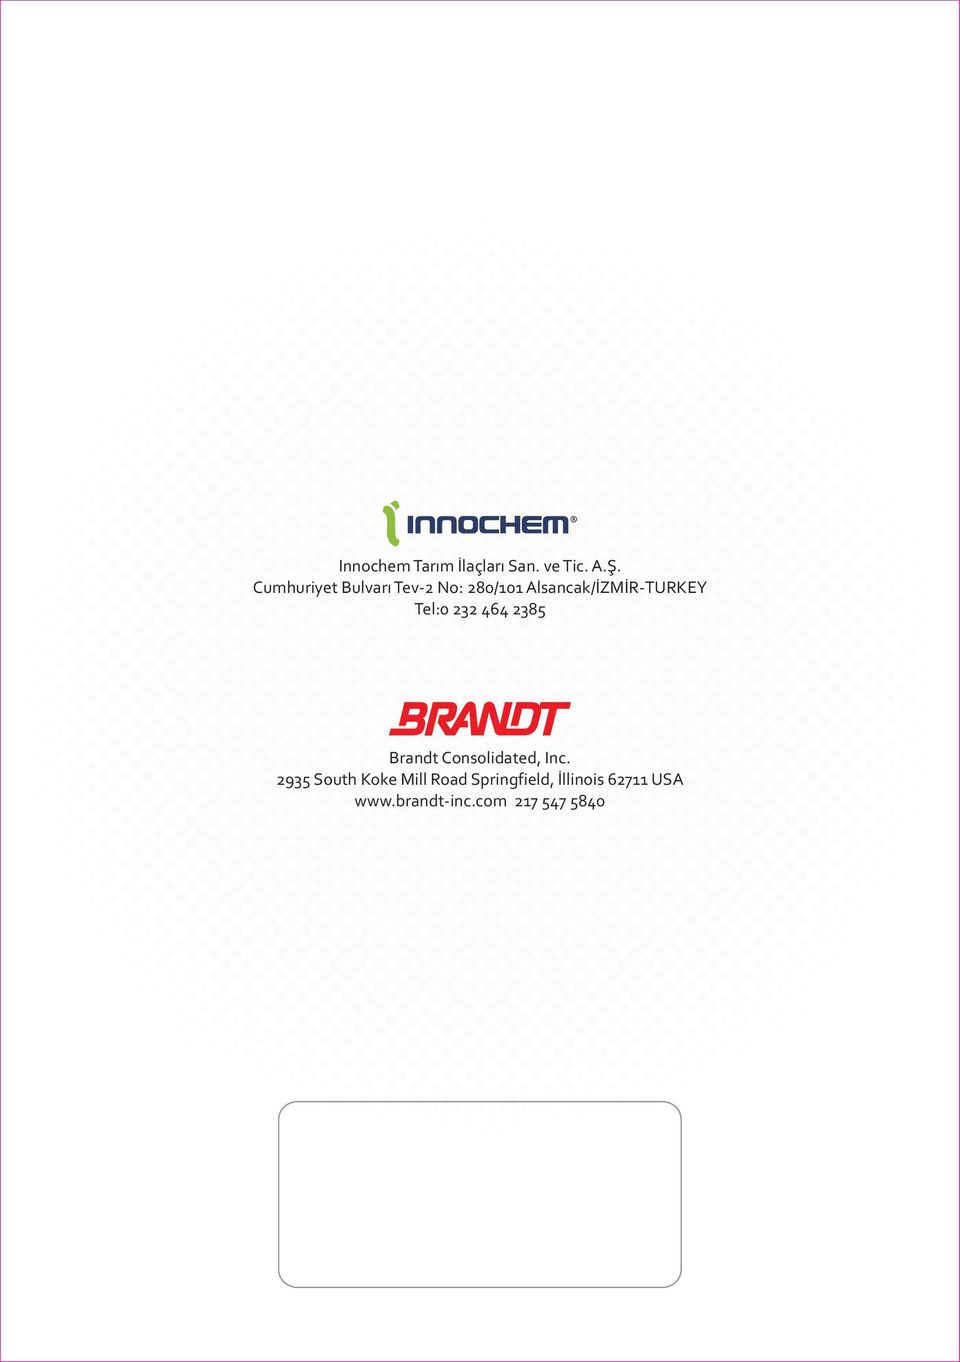 Tel:0 232 464 2385 Brandt Consolidated, Inc.